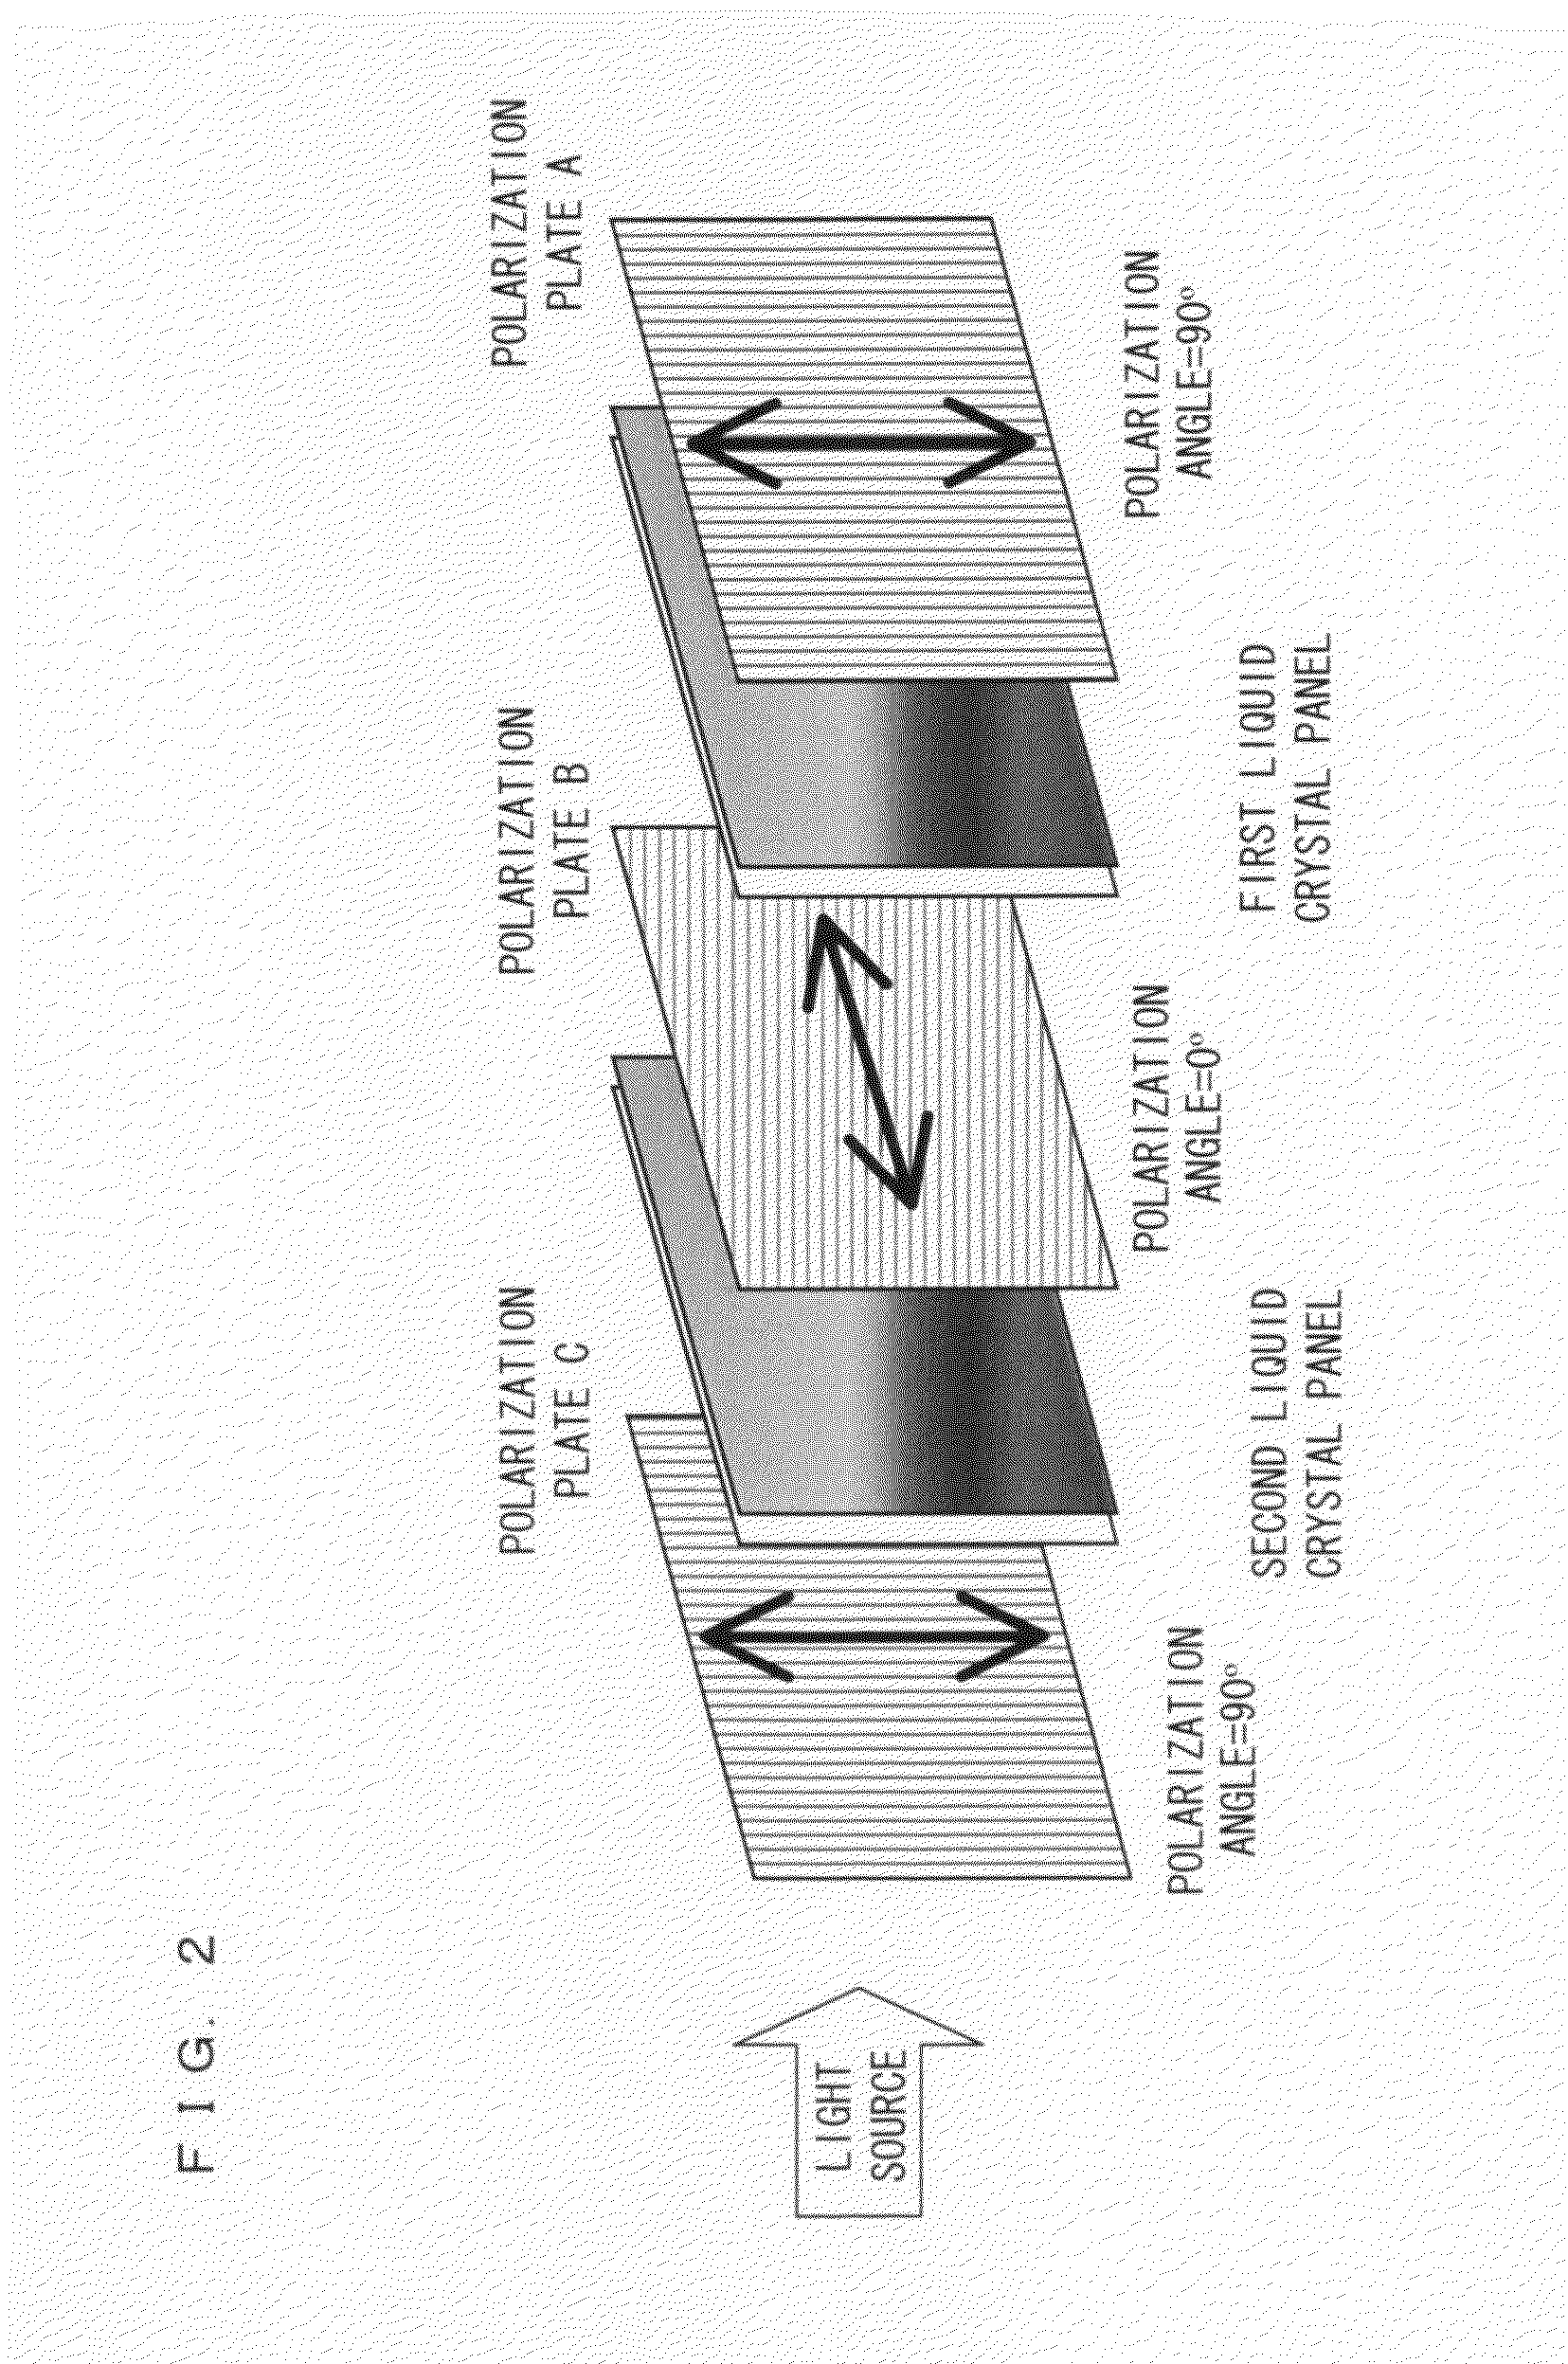 Display apparatus, driving apparatus of display apparatus, and electronic device